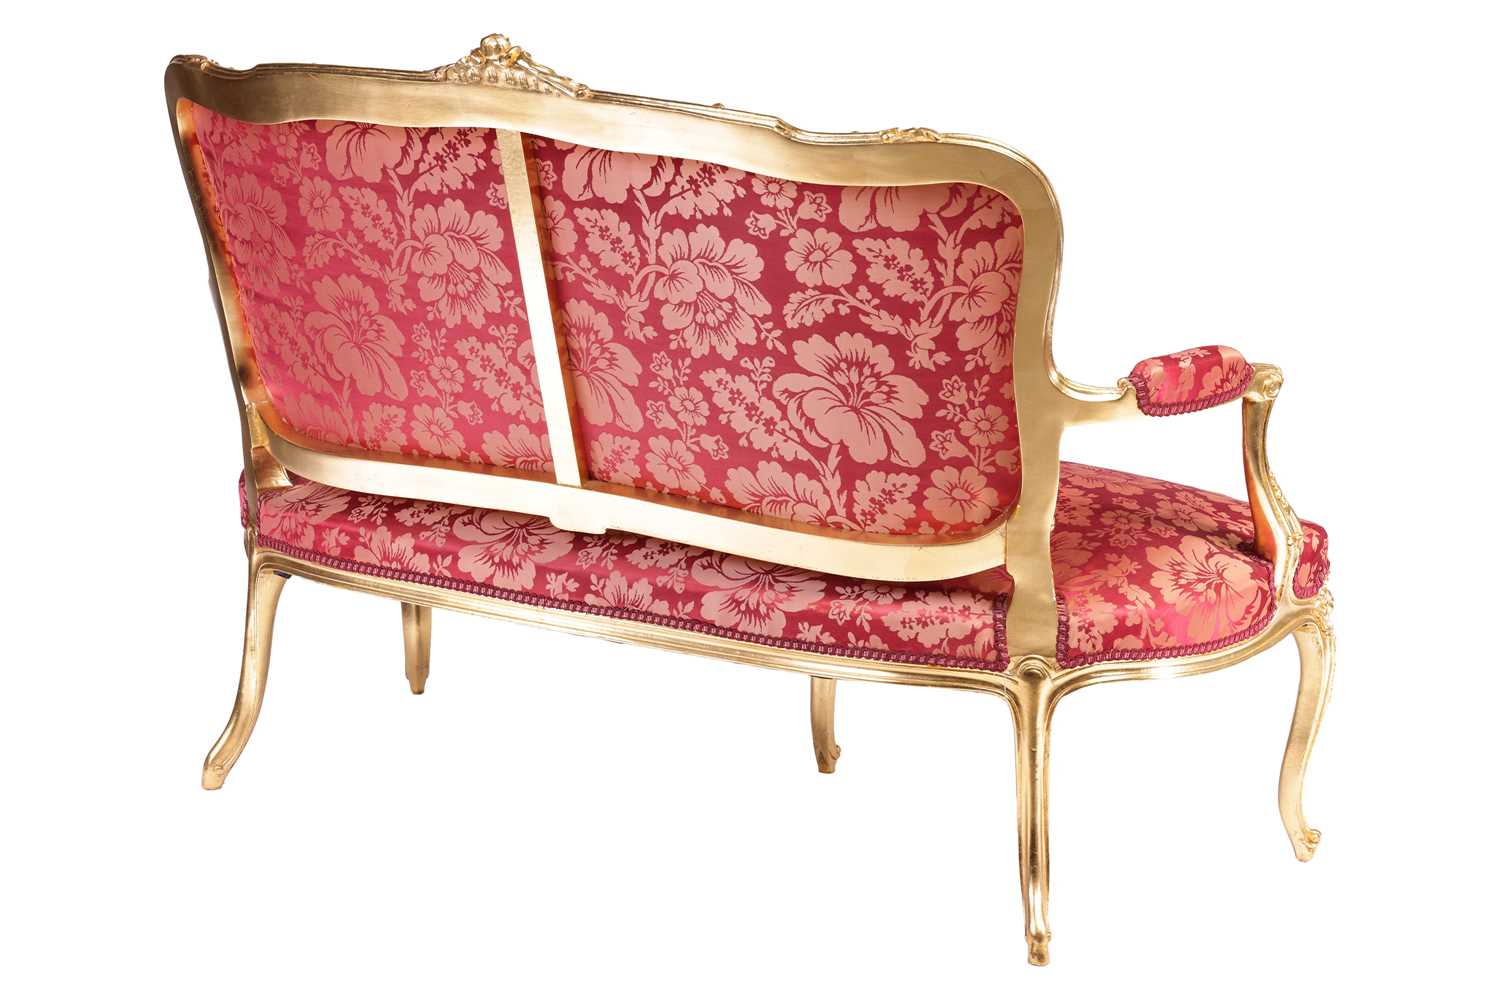 A 20th century Louis XV-style canape settee, with carved and molded wood and gilt gesso outline, stu - Image 3 of 5